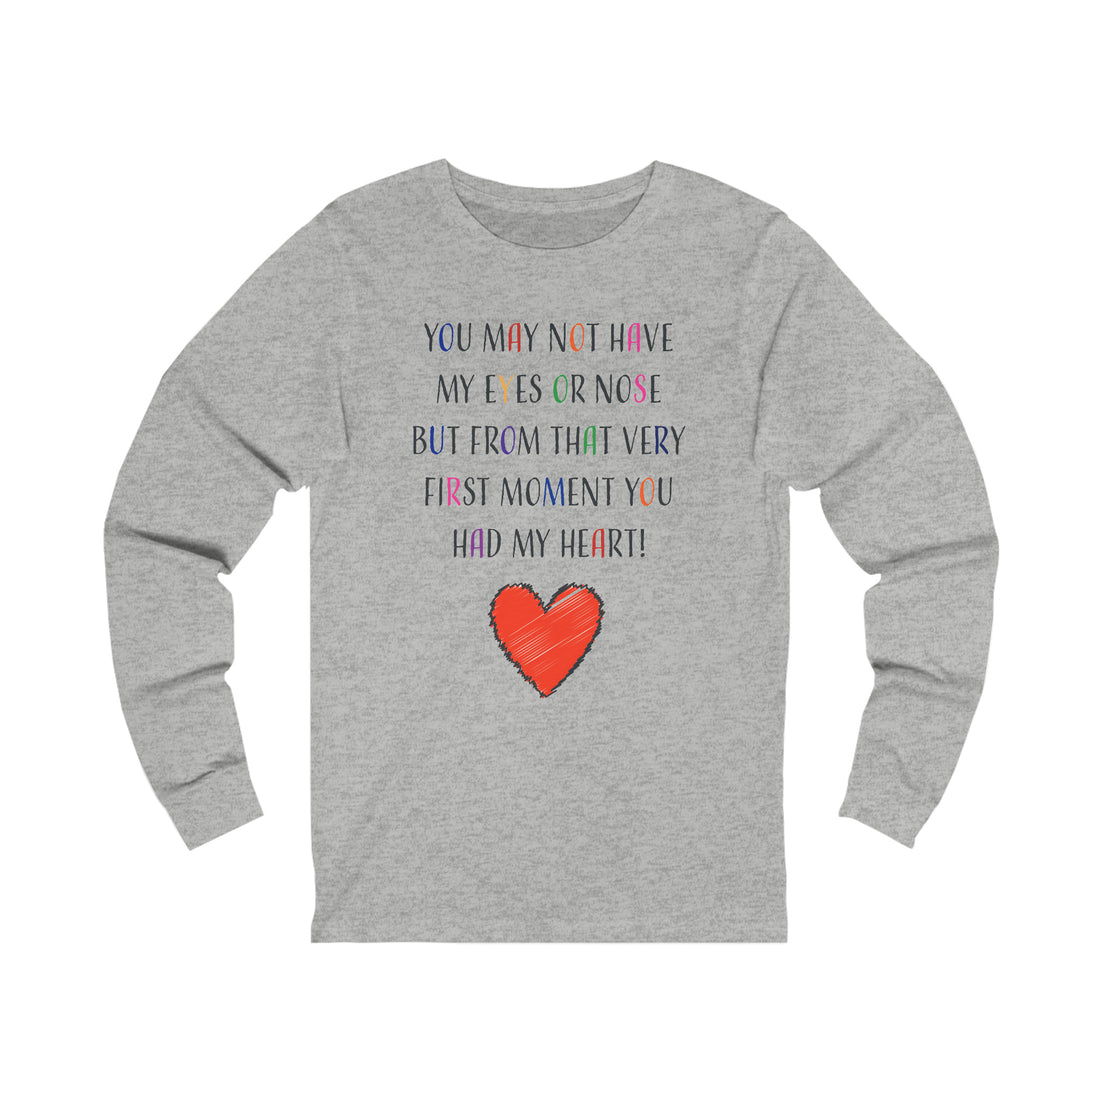 You May Not Have My Eyes Or Nose But From That Very First Moment You Had My HEART - Unisex Jersey Long Sleeve Tee